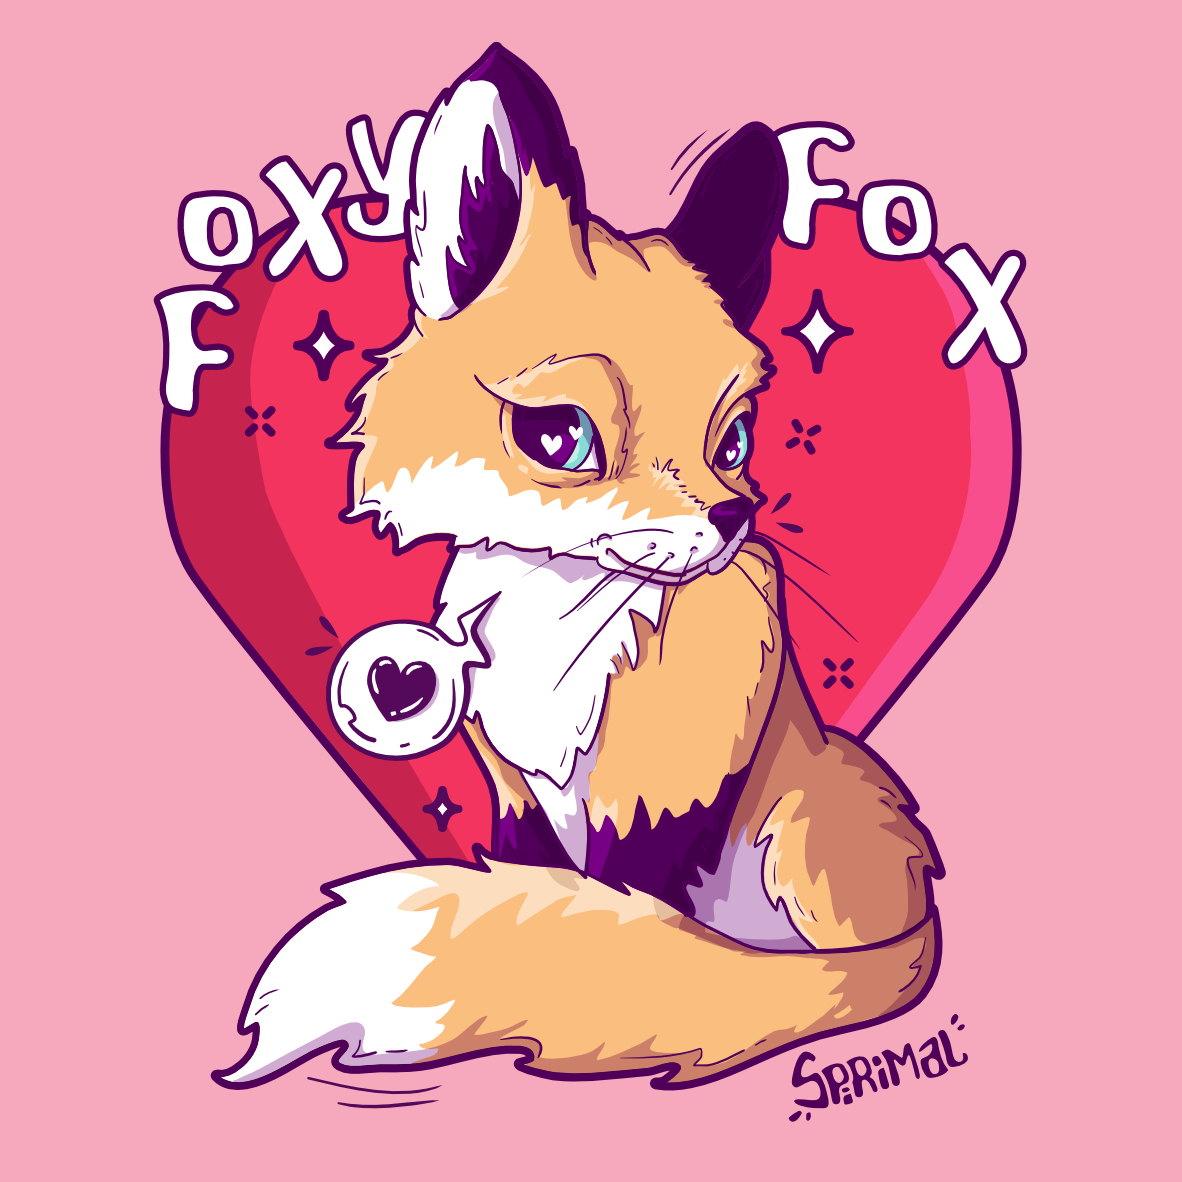 You're foxy